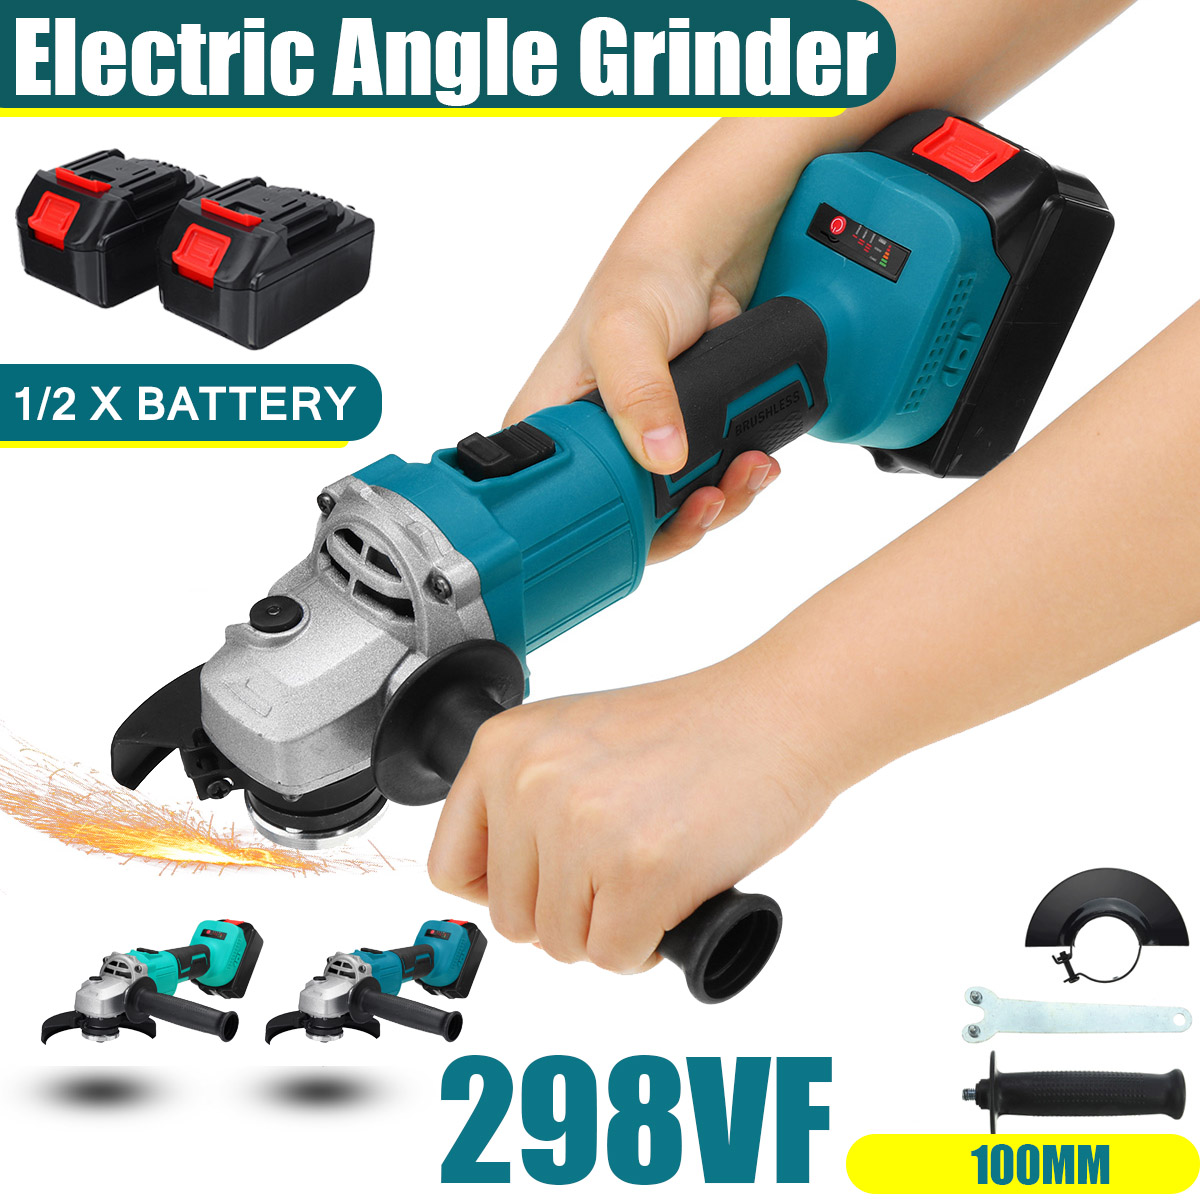 100mm-Brushless-Cordless-Angle-Grinder-3-Gears-Polishing-Grinding-Cutting-Tool-With-Battery-Also-For-1858791-3